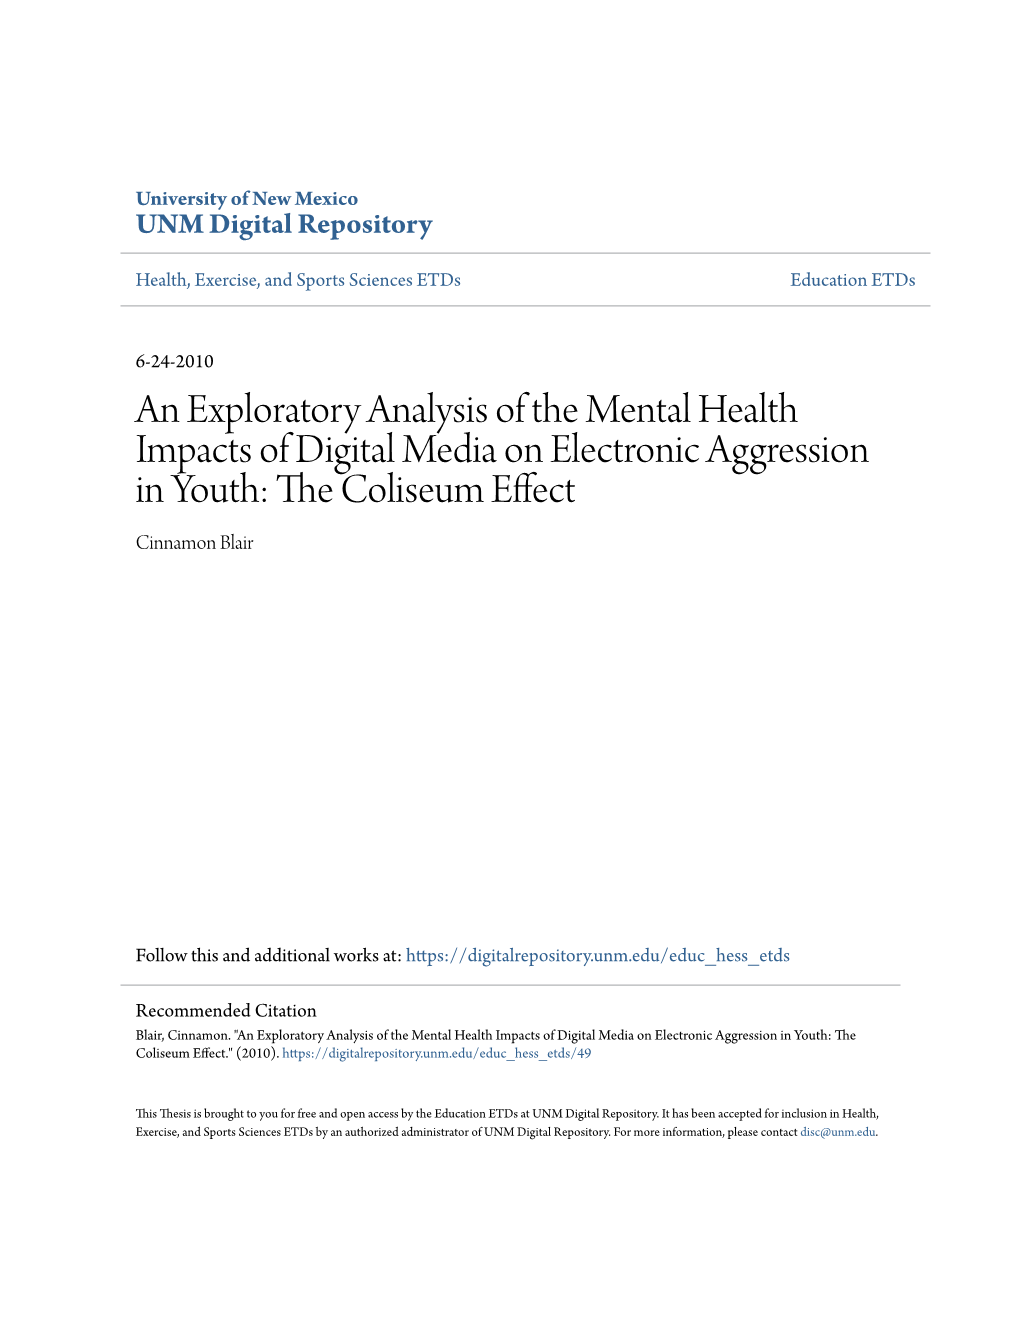 An Exploratory Analysis of the Mental Health Impacts of Digital Media on Electronic Aggression in Youth: the Olic Seum Effect Cinnamon Blair